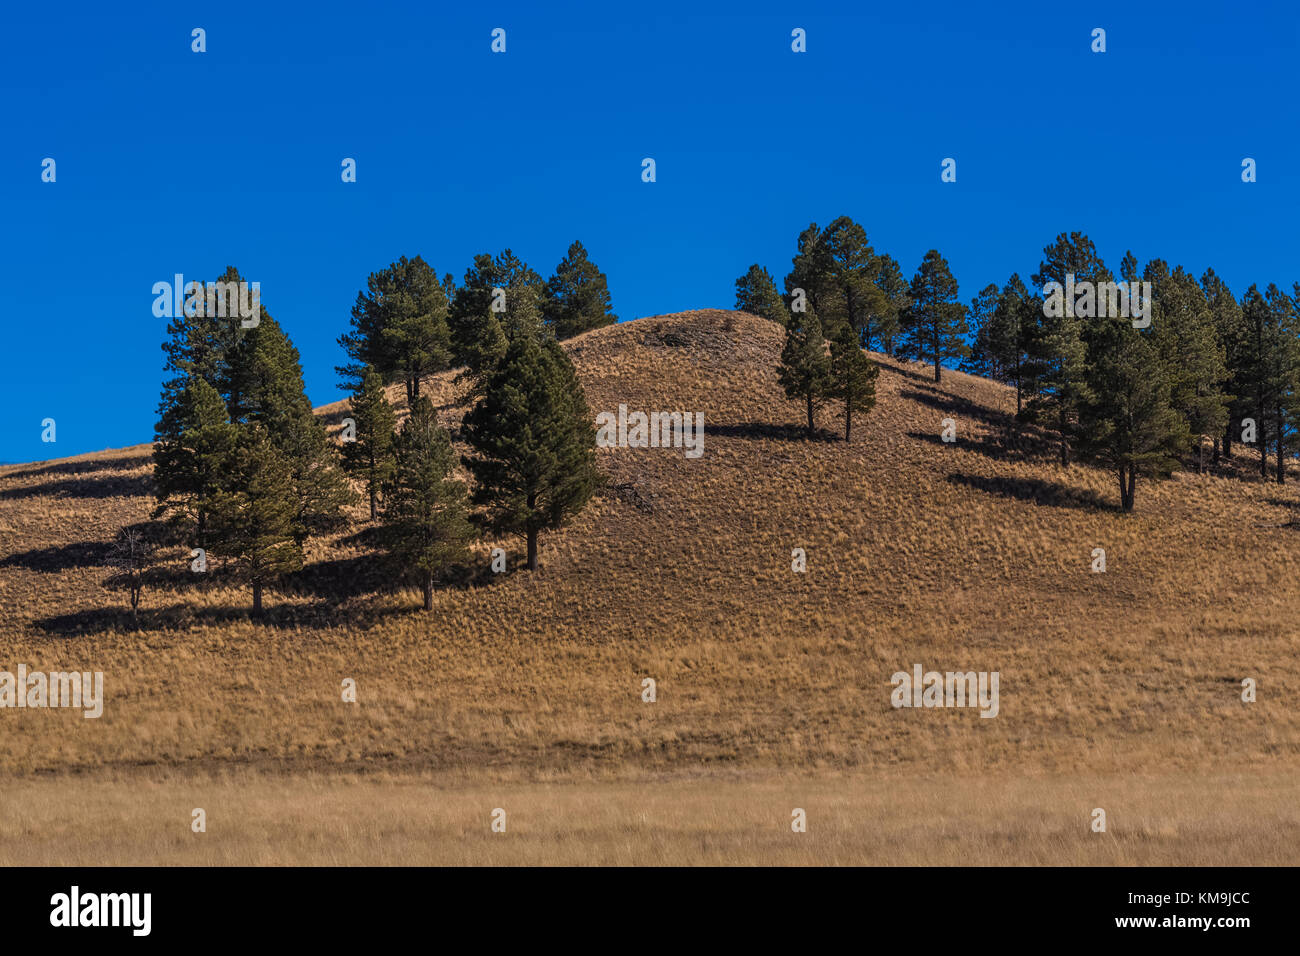 Ponderosa Pines, Pinus ponderosa, and grasslands in Valles Caldera National Preserve, a preserve run by the National Park Service, New Mexico, USA Stock Photo